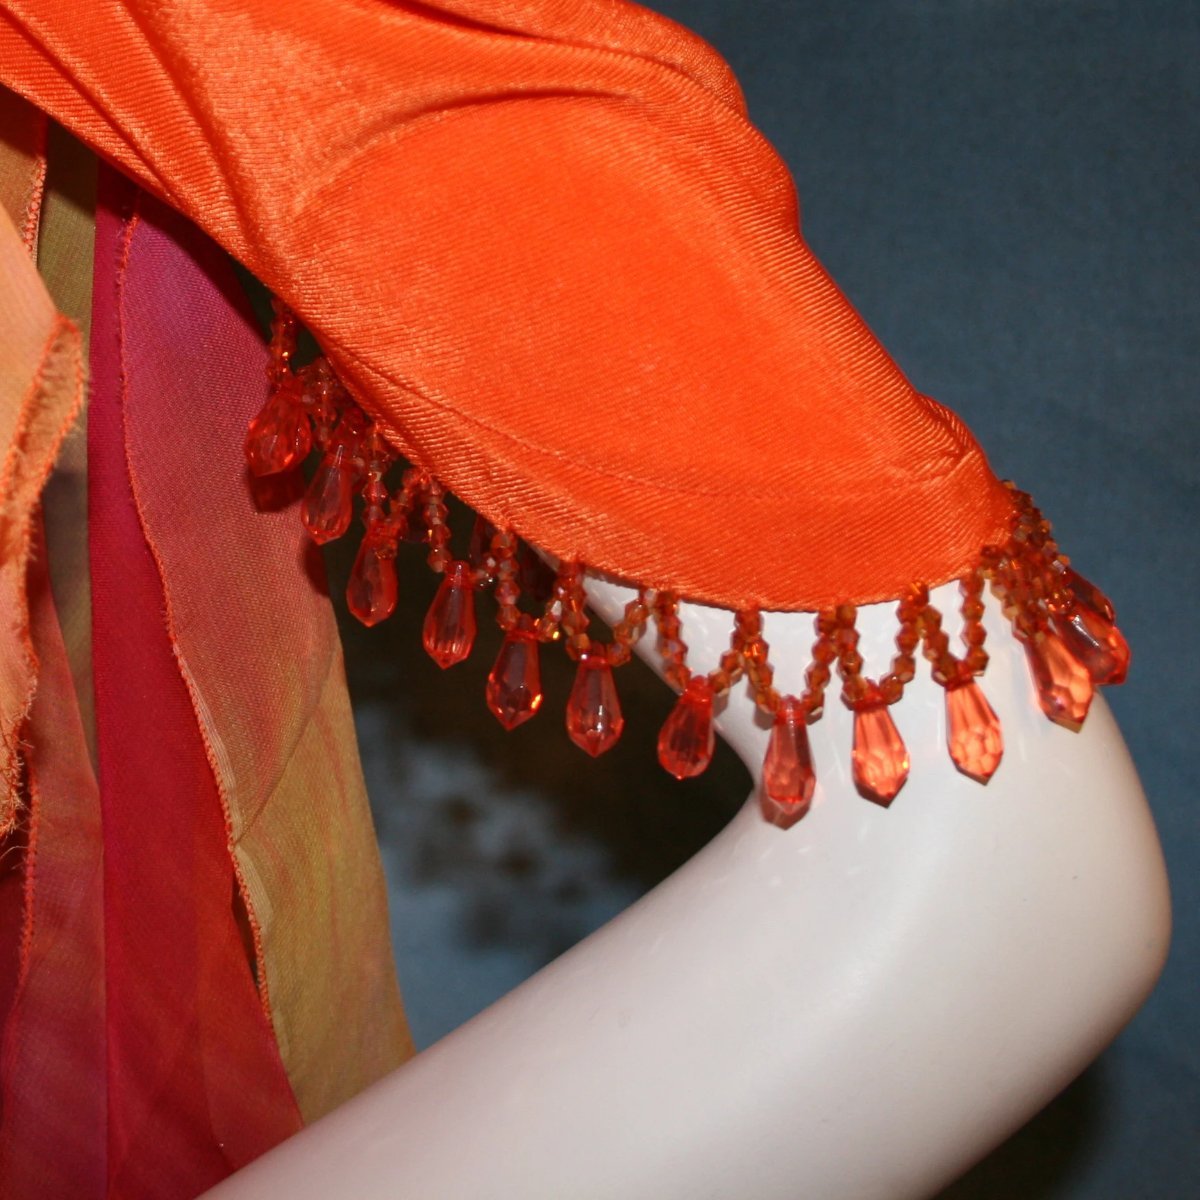 arm detail of Orange social ballroom dress created in luxurious solid slinky fabric with chiffon insets of rainbow oranges & yellows, with hand beading on arm draping. Very full around bottom, and makes a great beginner ballroom dancer smooth dress.